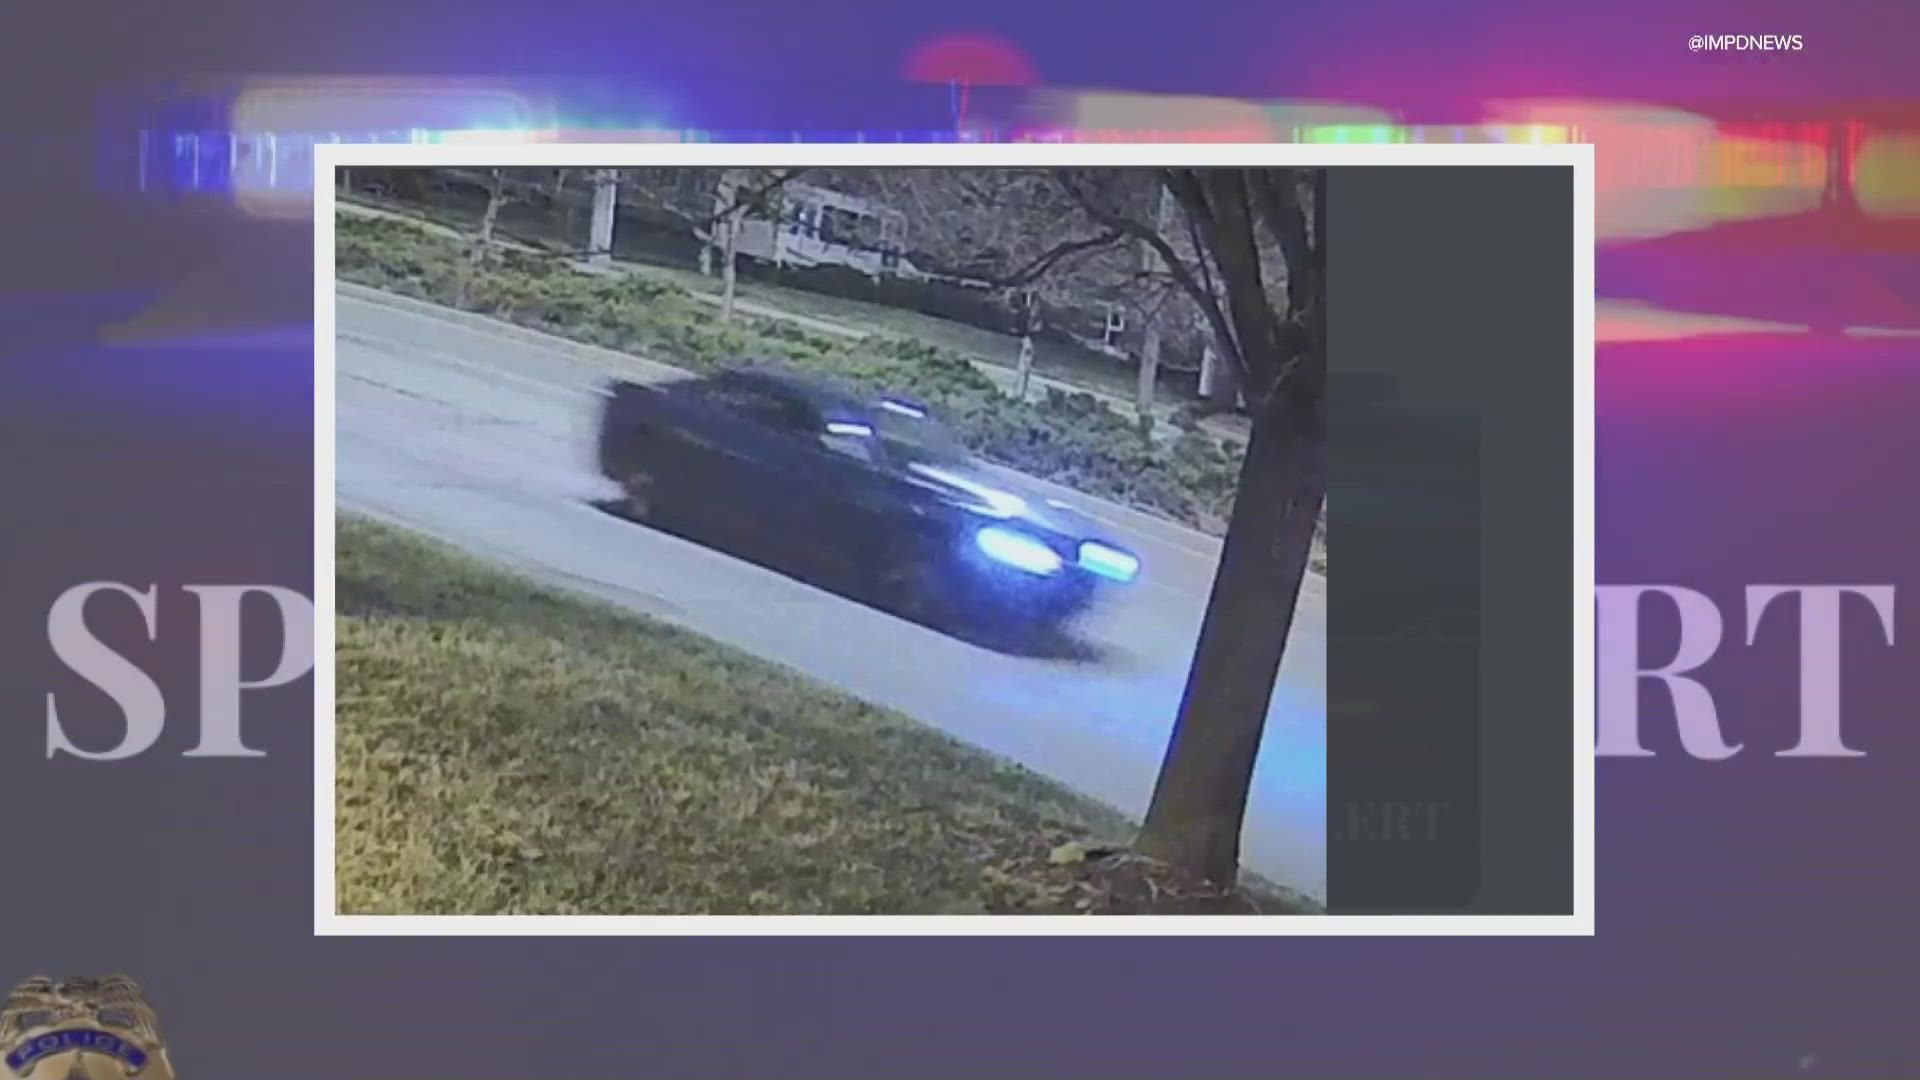 In an update on Saturday, police said the vehicle had been located and the investigation was ongoing. No arrests have been made.